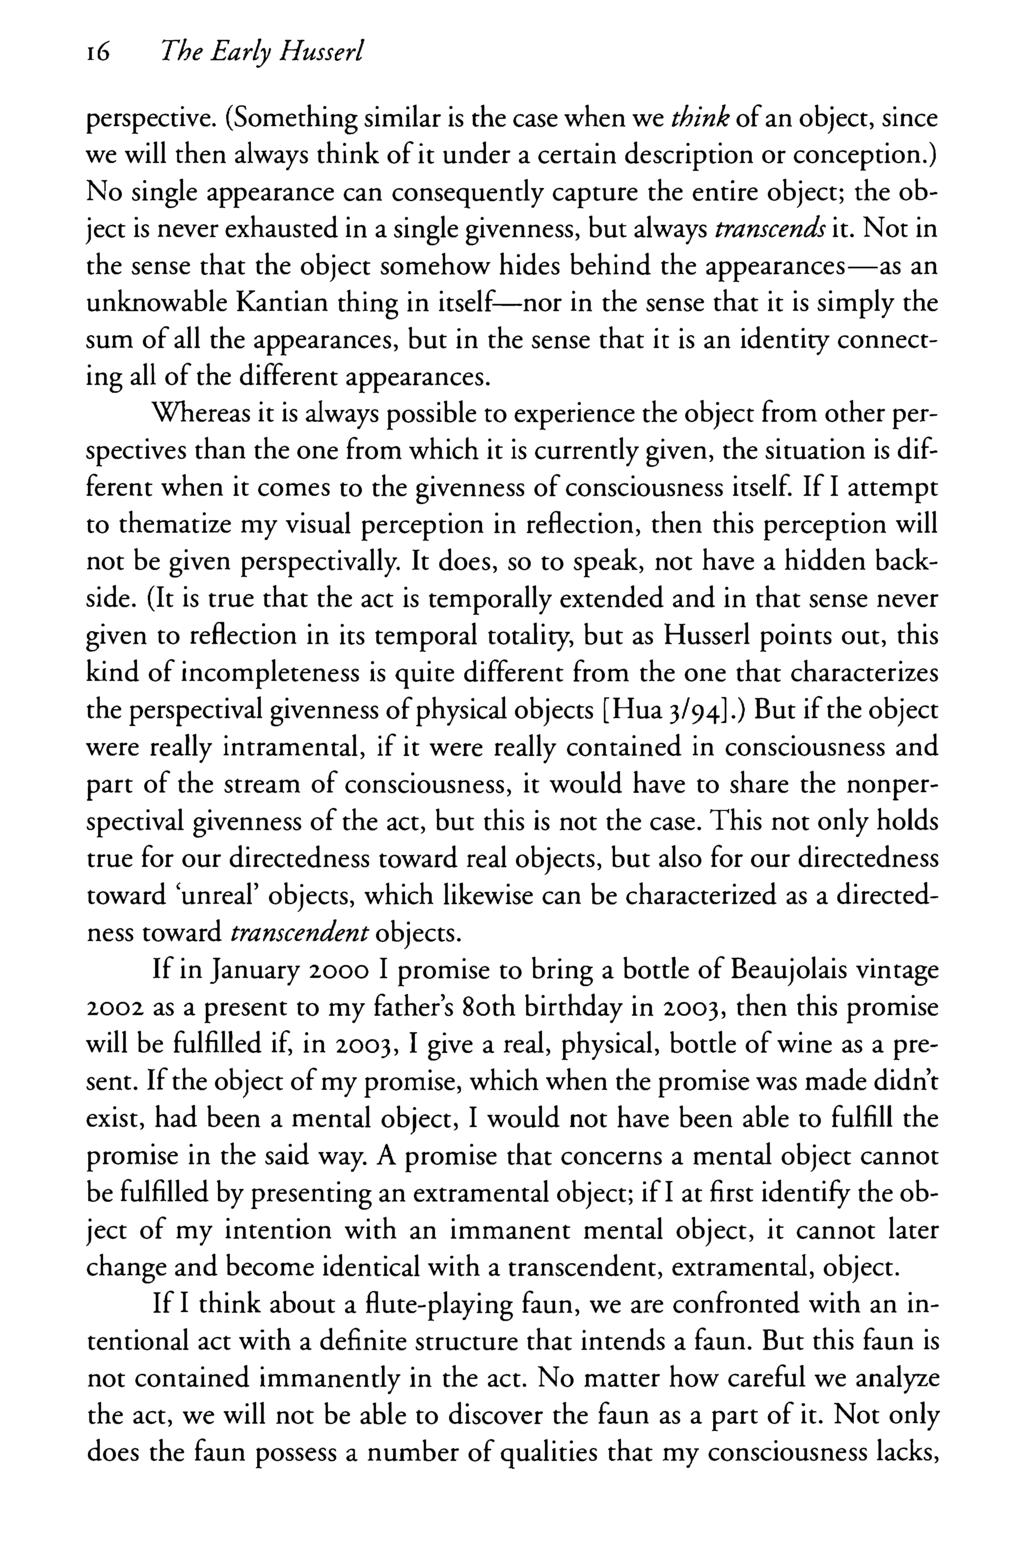 16 The Early Husserl perspective. (Something similar is the case when we think of an object, since we will then always think of it under a certain description or conception.